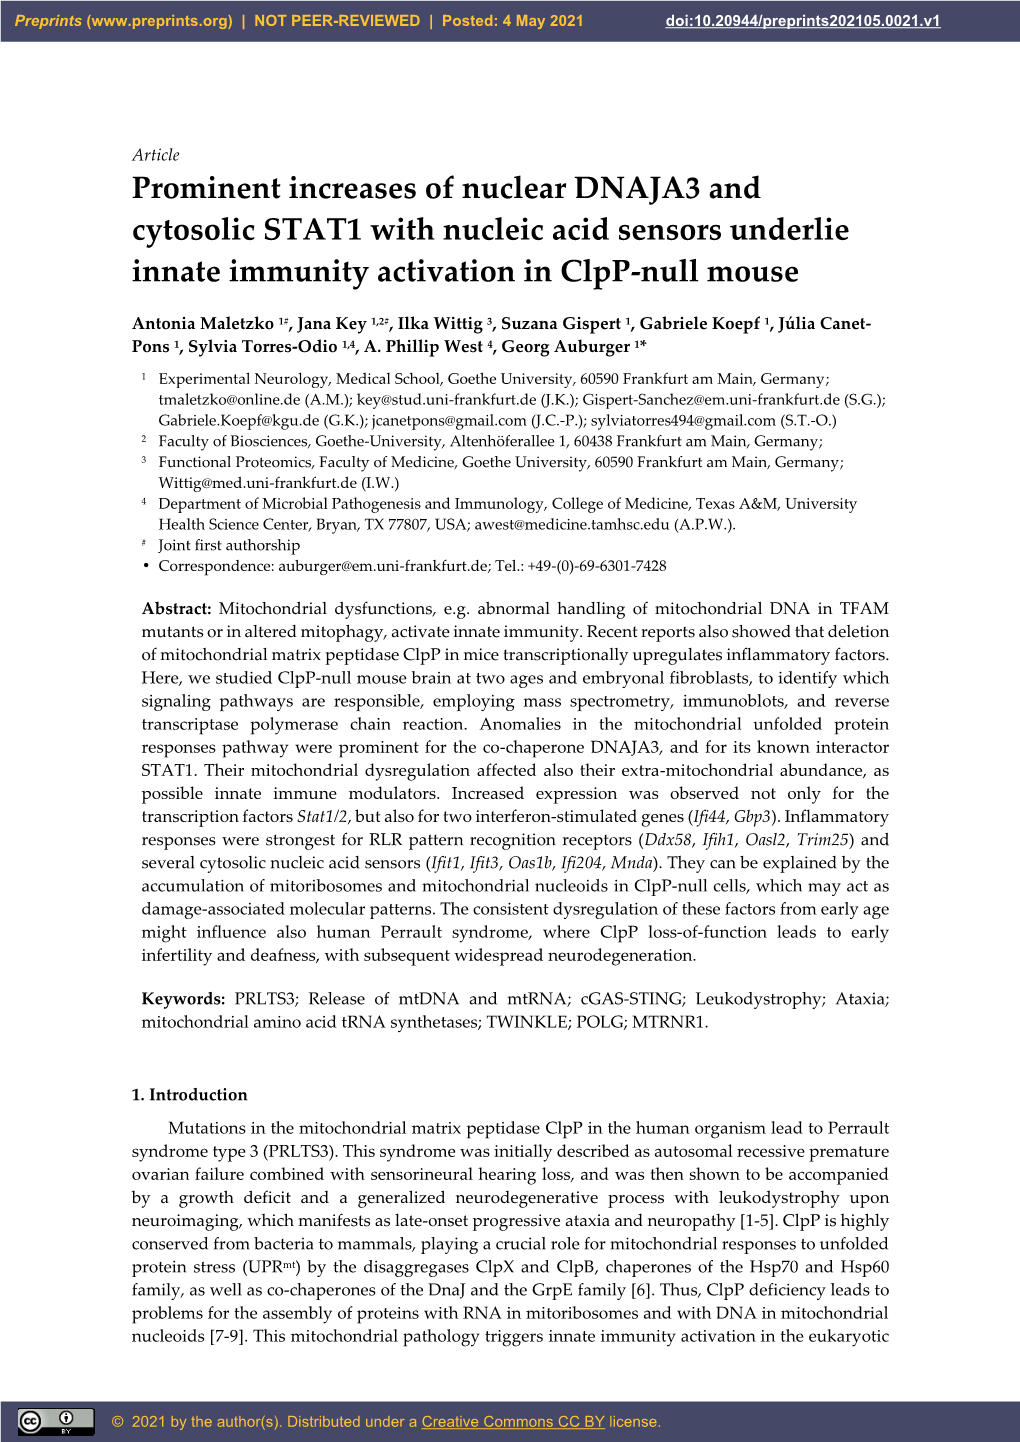 Prominent Increases of Nuclear DNAJA3 and Cytosolic STAT1 with Nucleic Acid Sensors Underlie Innate Immunity Activation in Clpp-Null Mouse